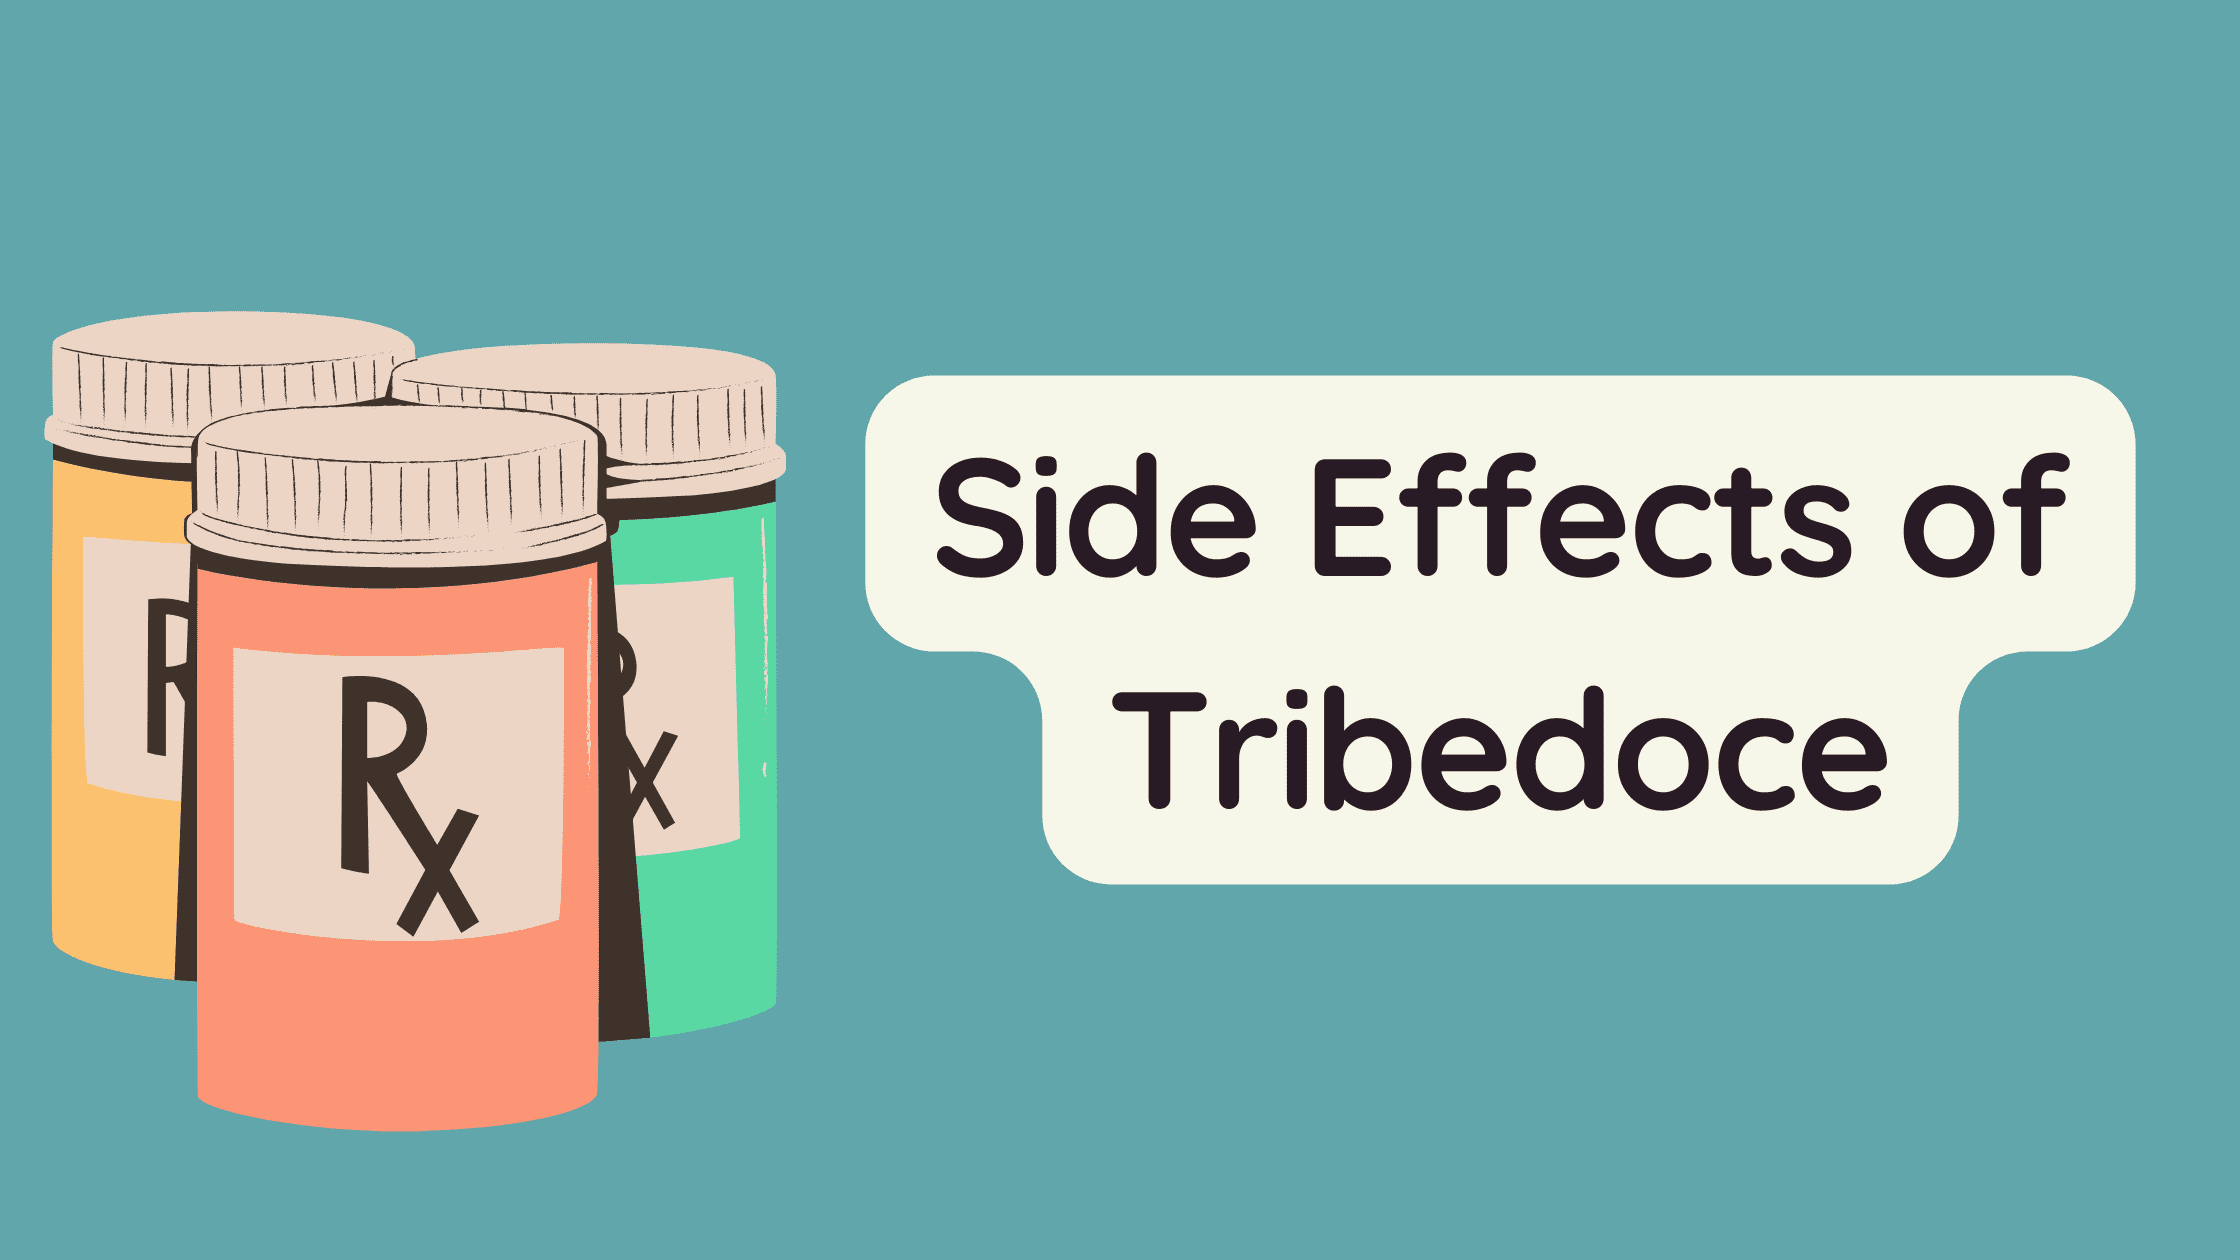 Side Effects of Tribedoce